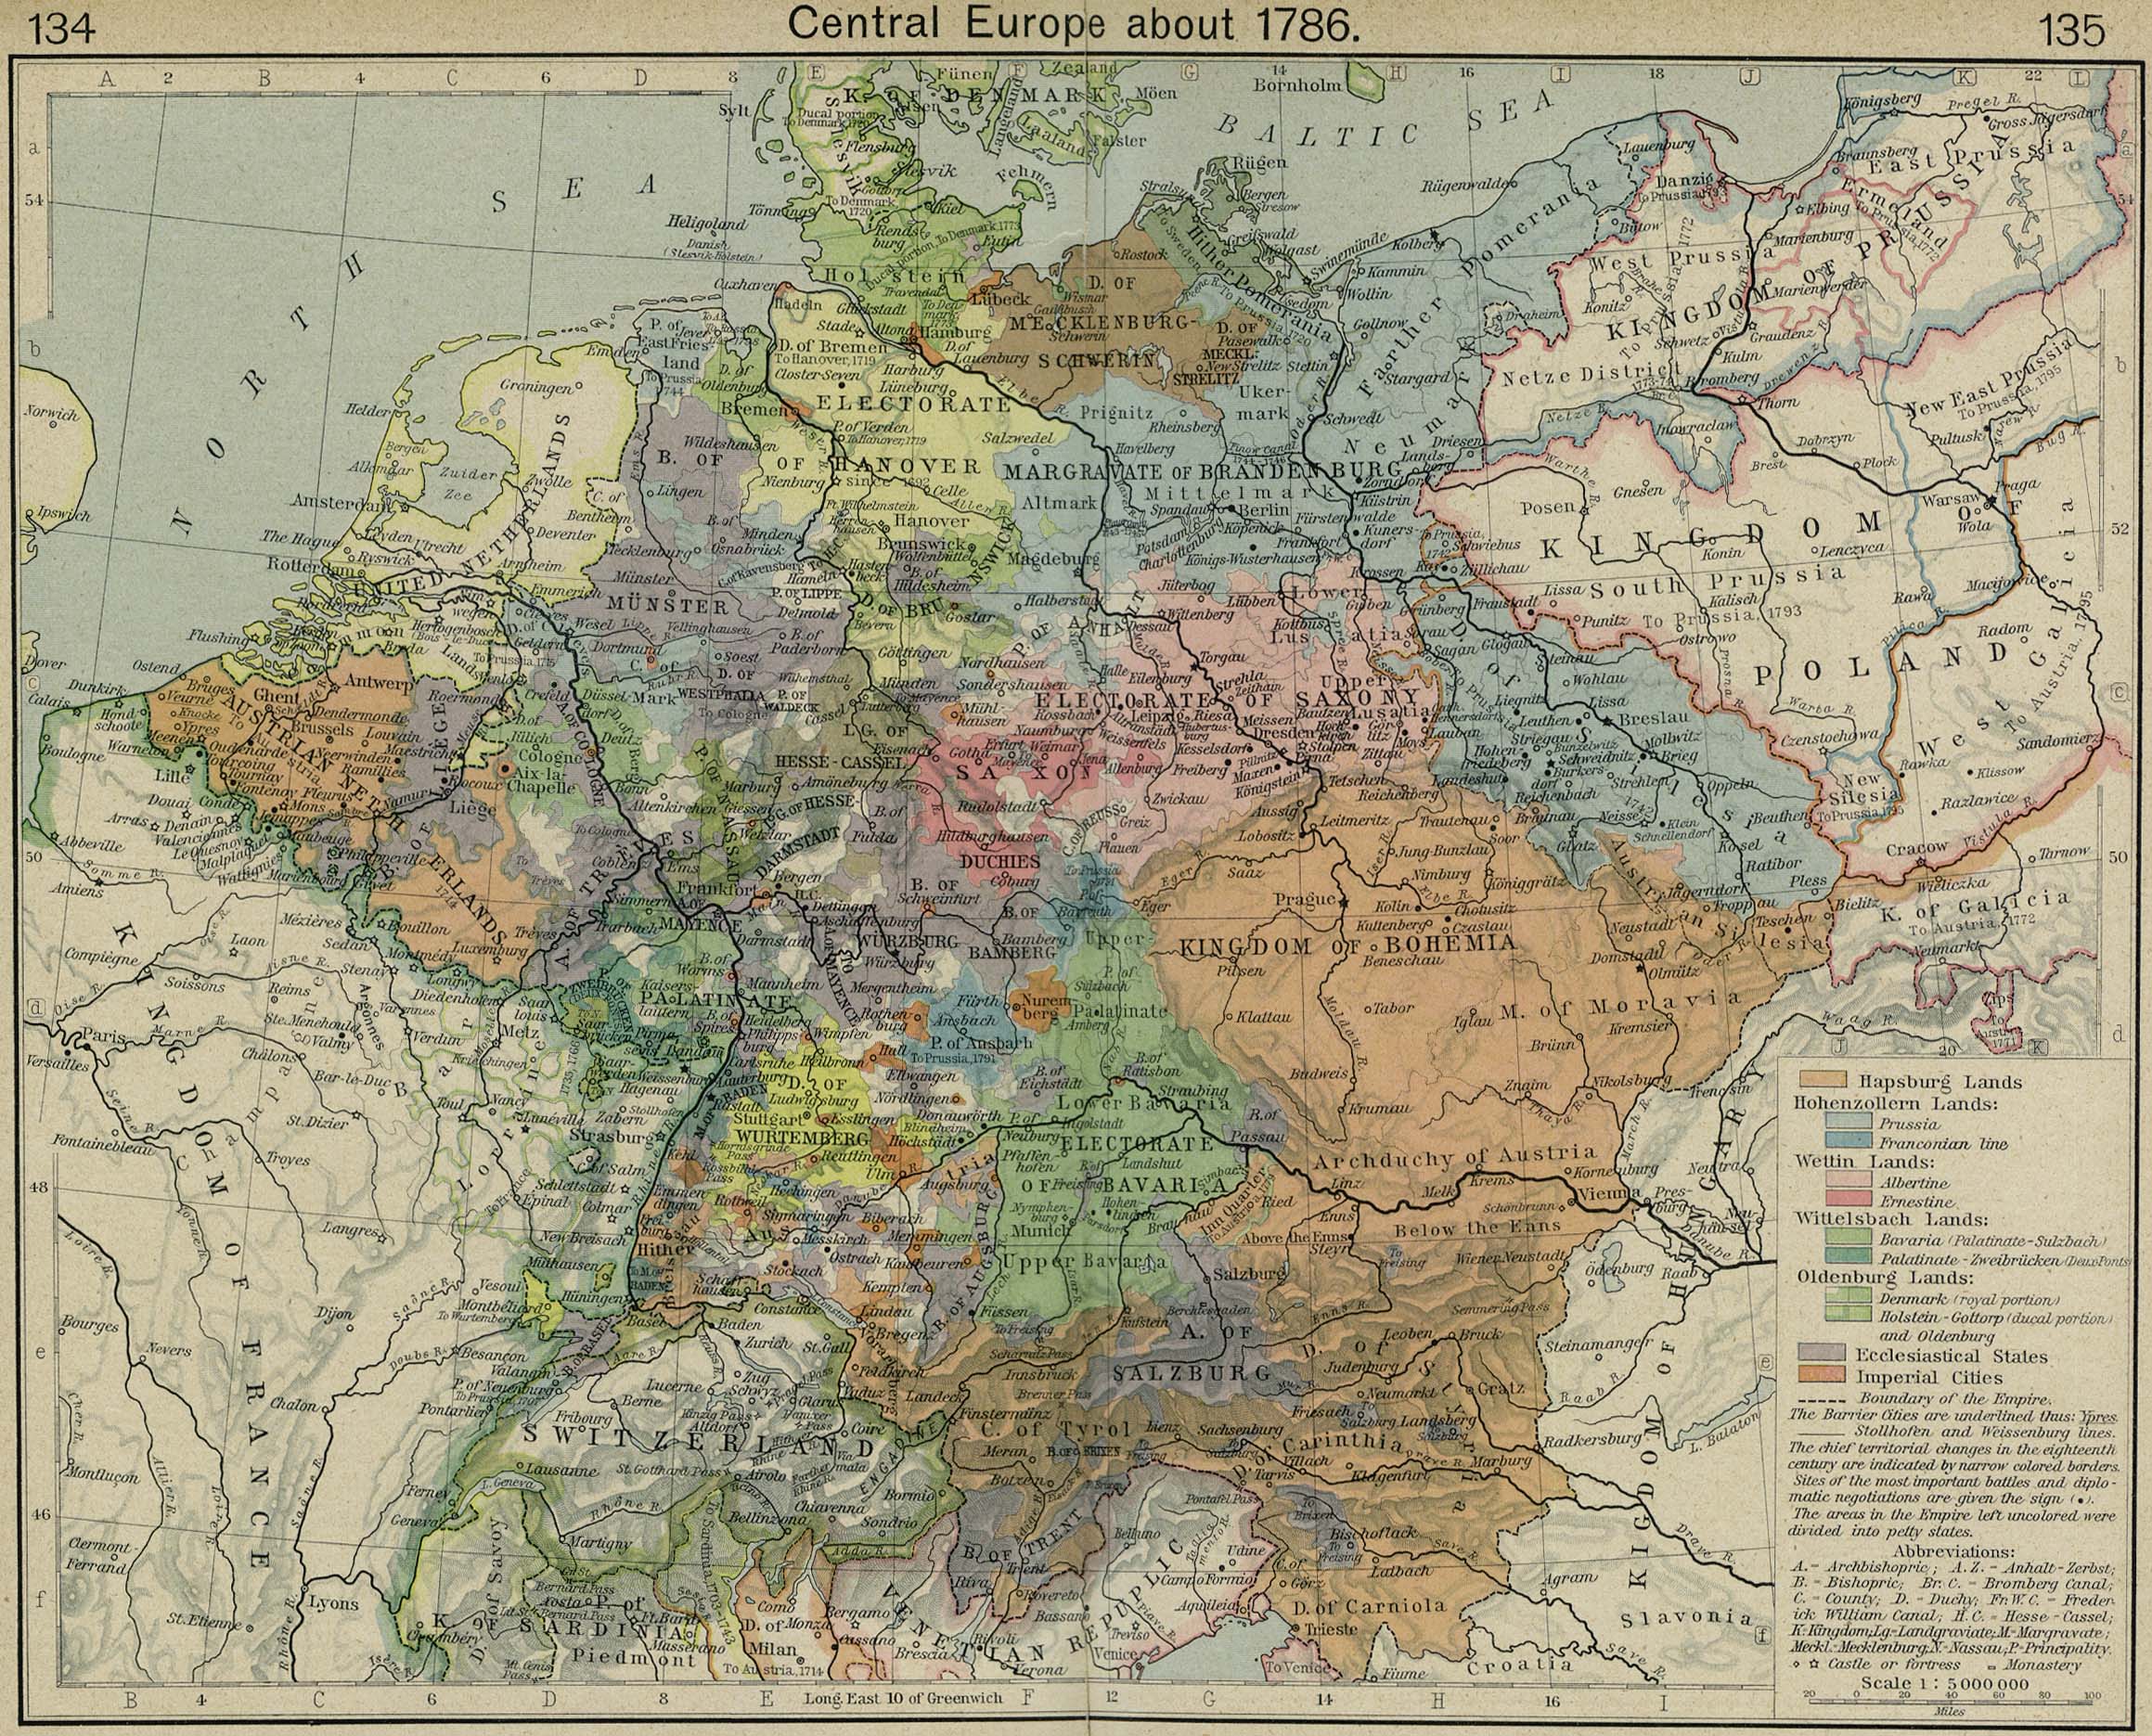 Map of Central Europe about 1786